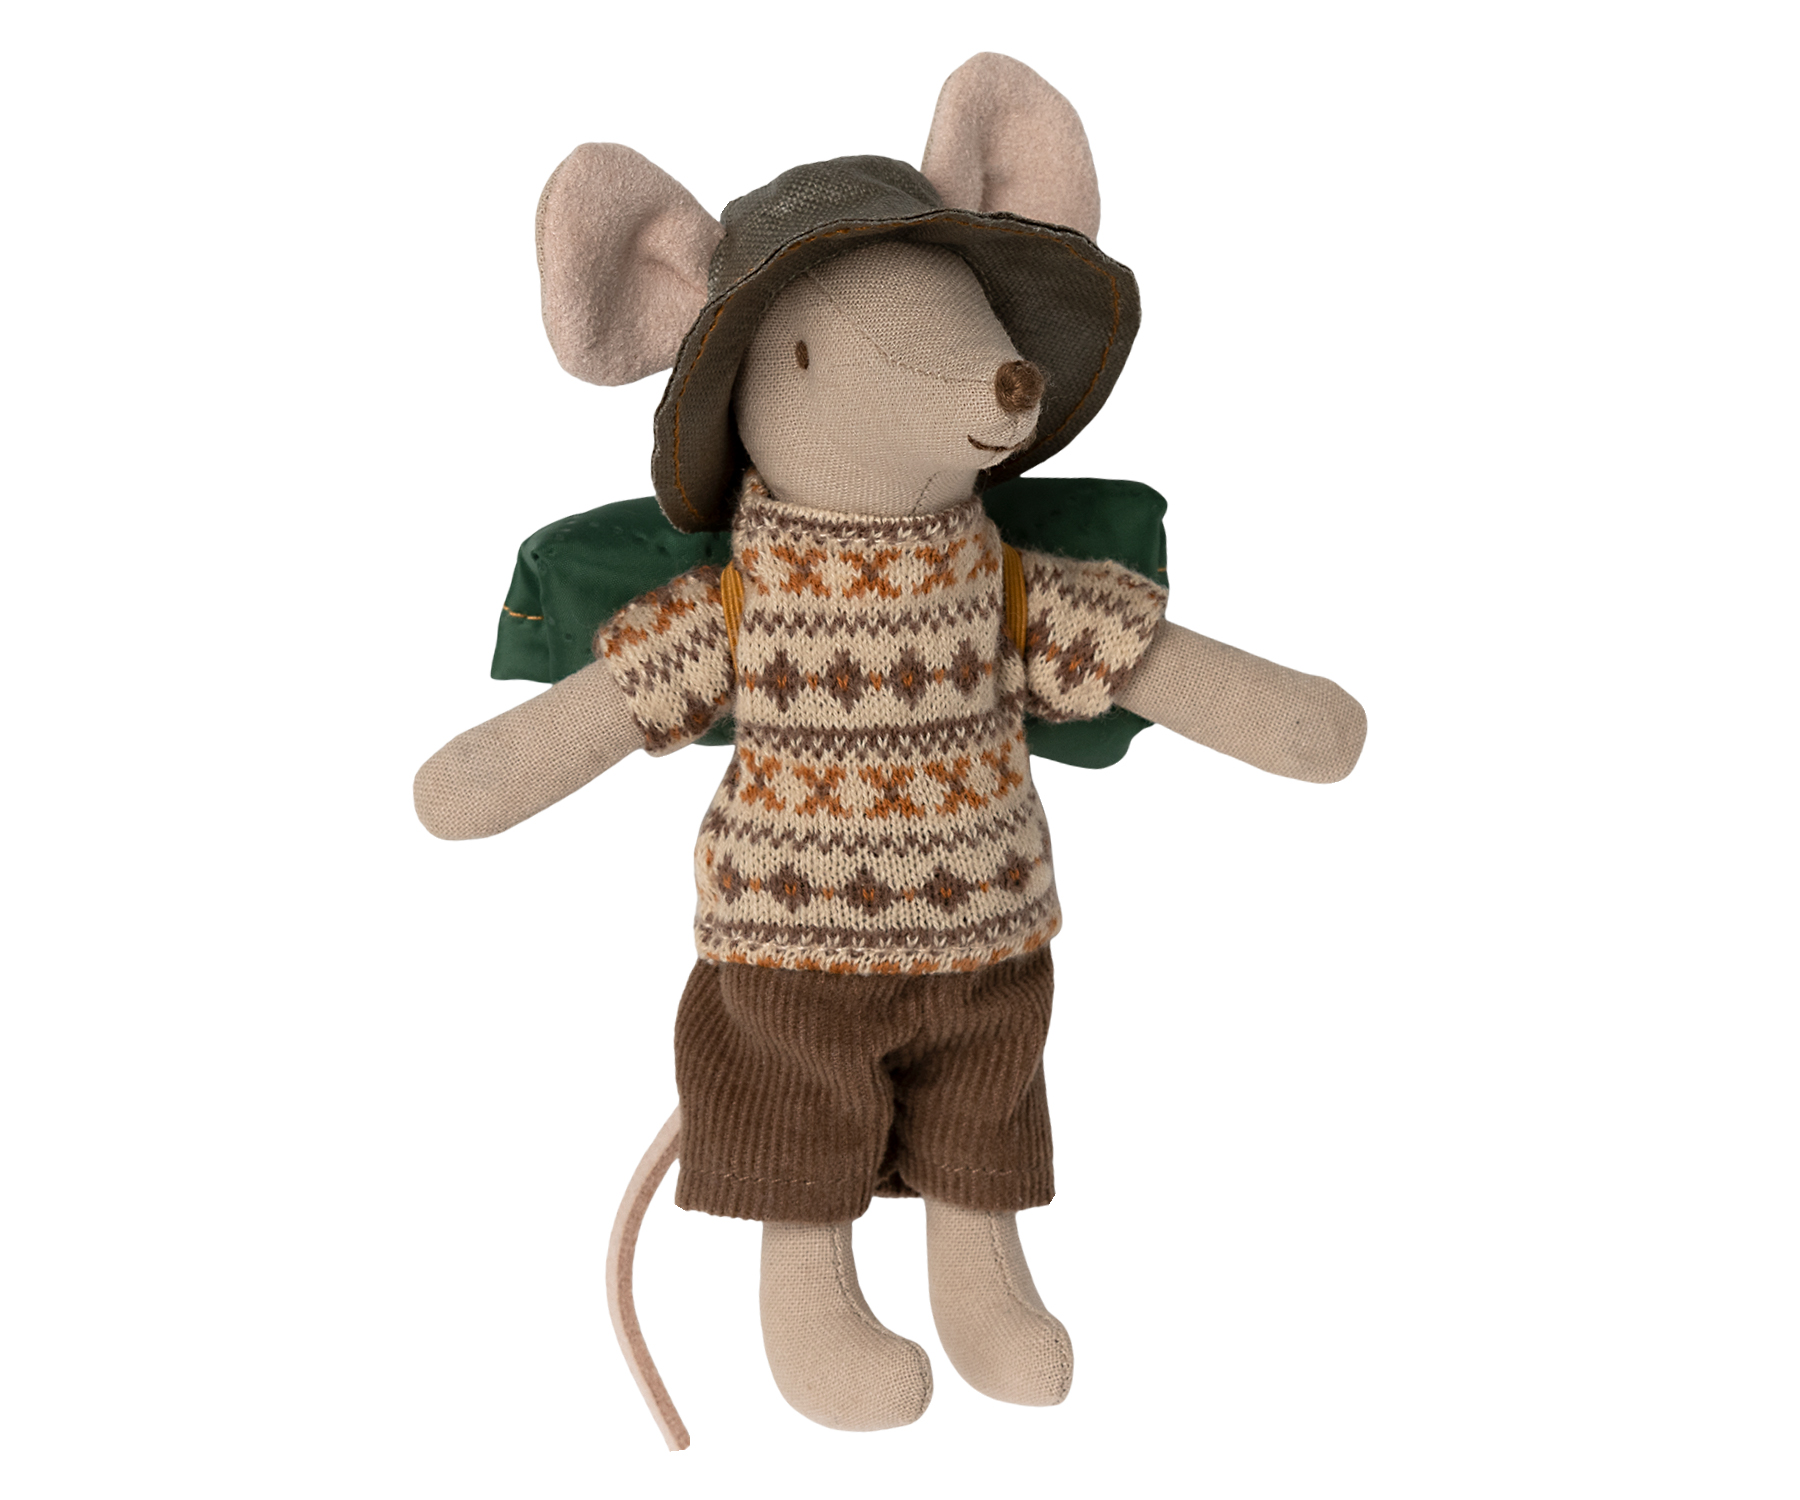 Wildlife guide mouse